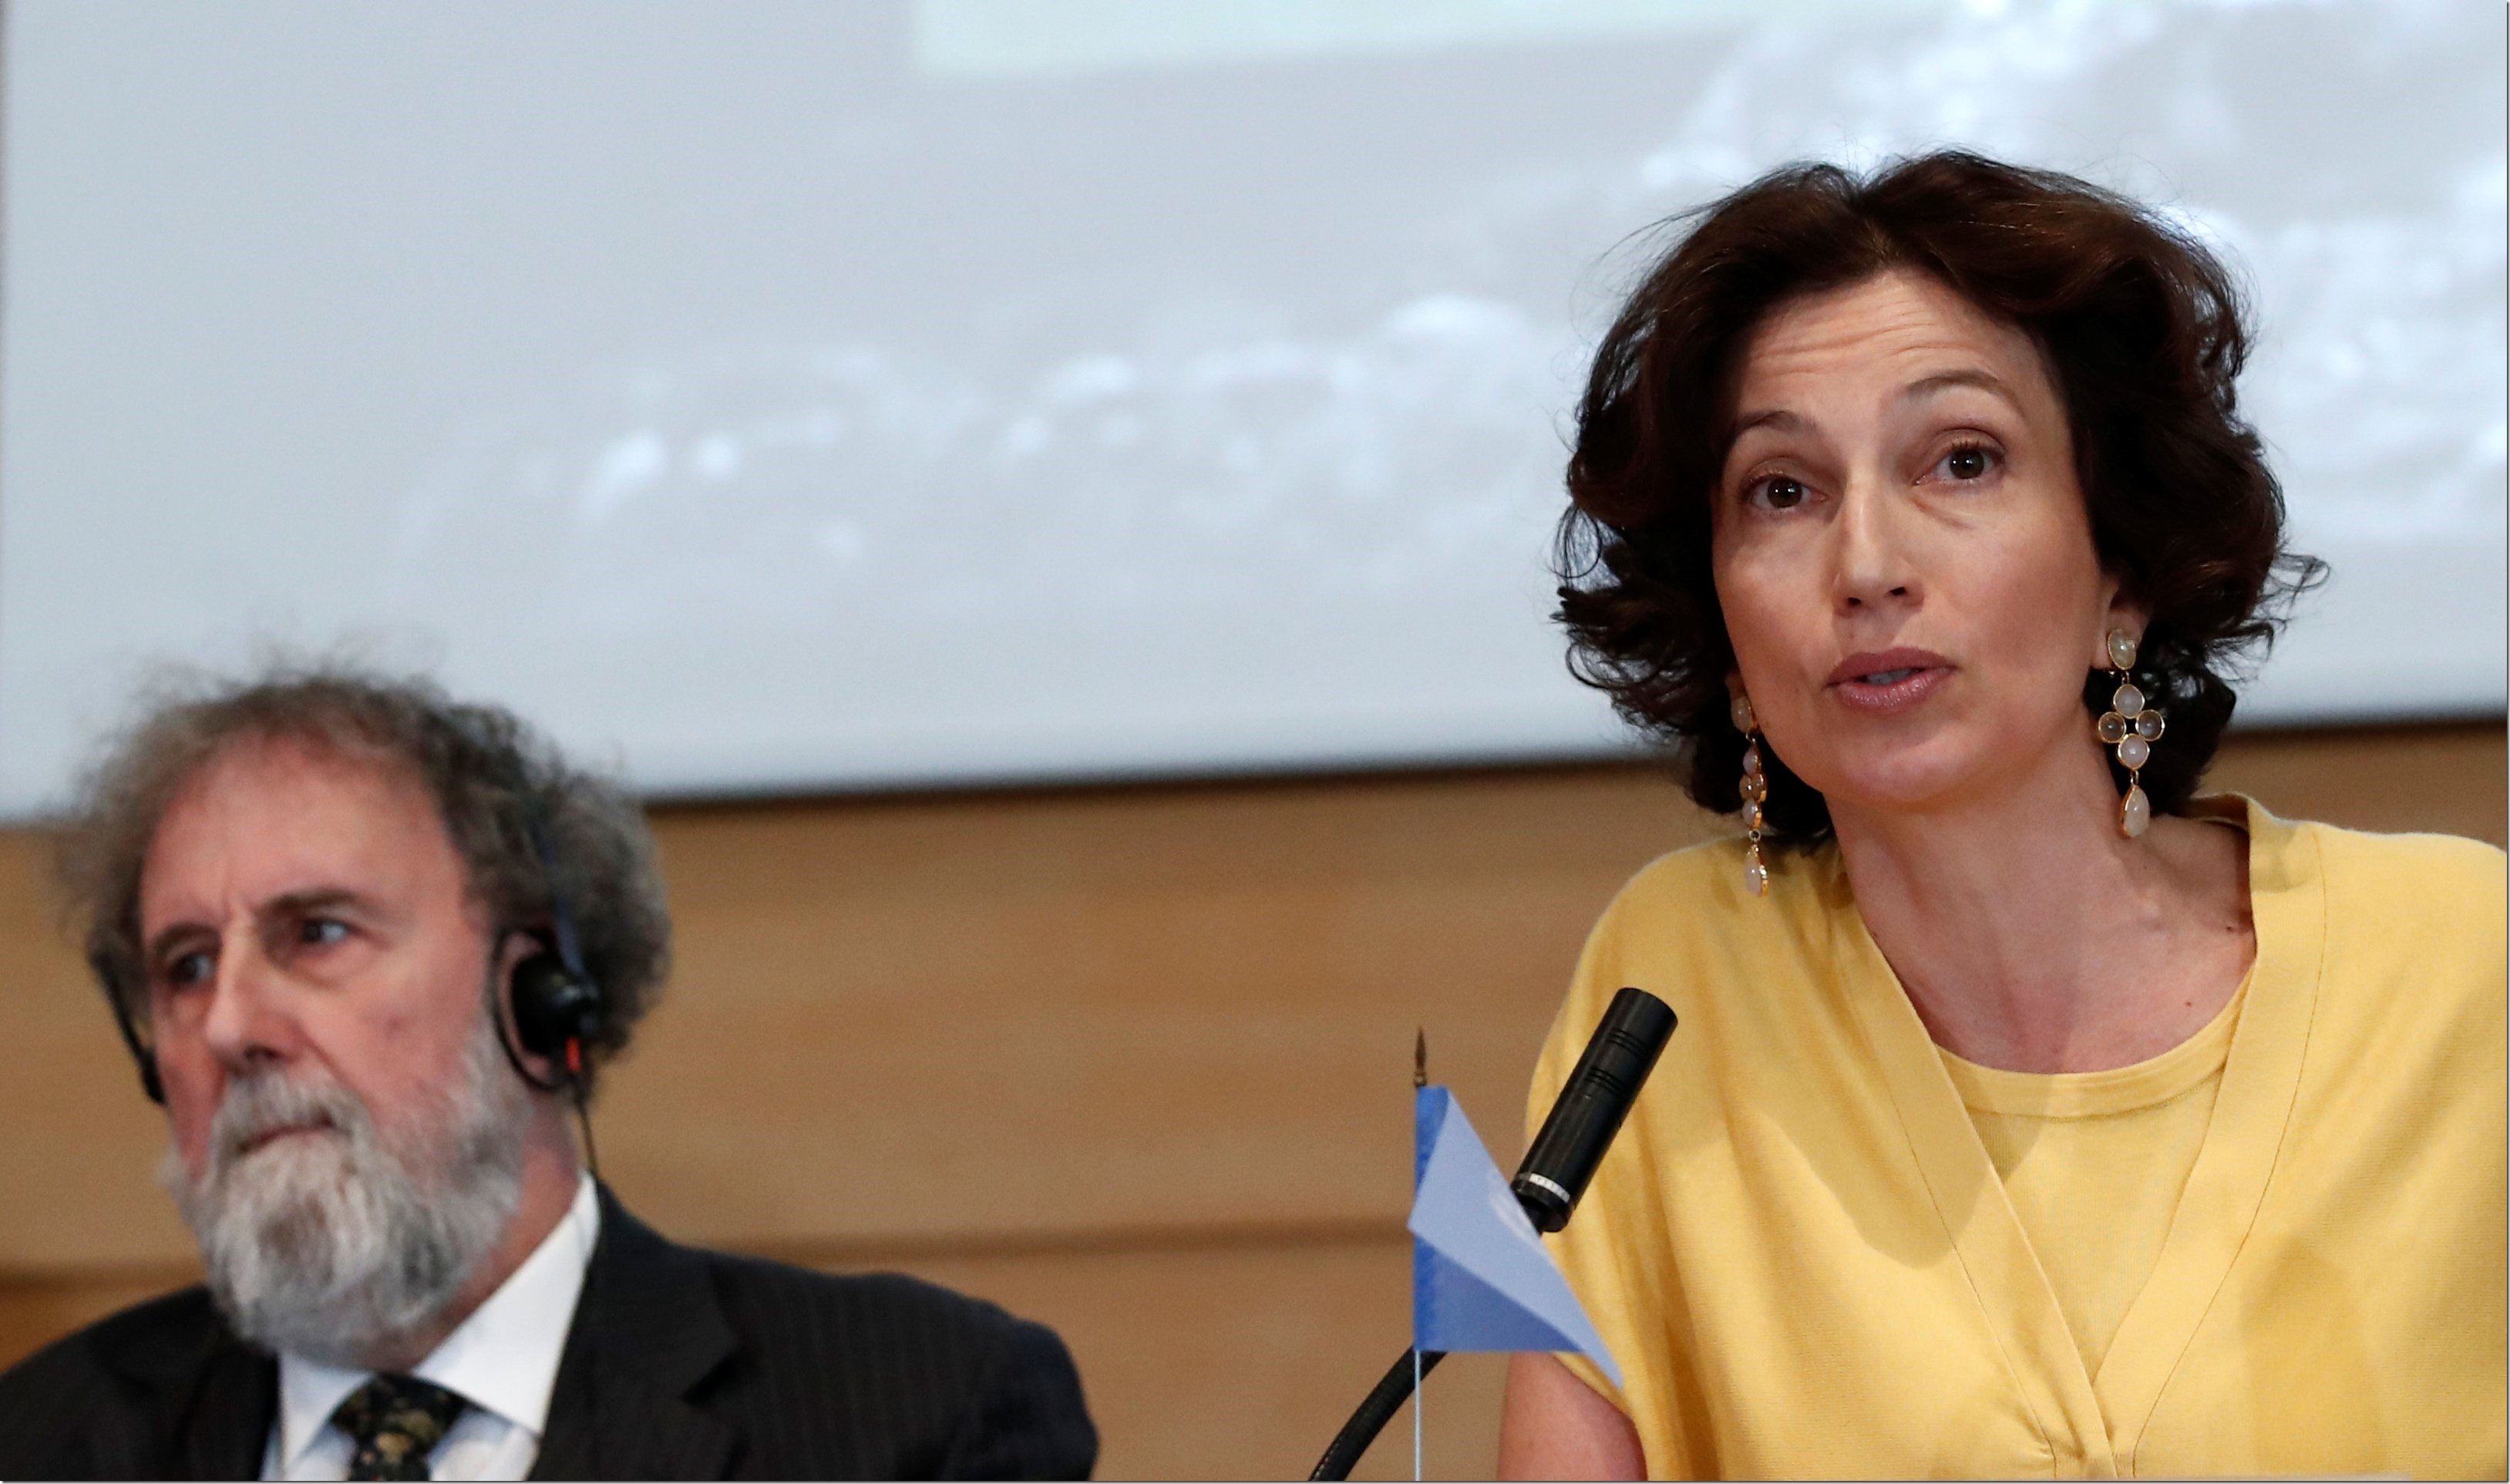 Audrey Azoulay, Director-General of UNESCO and former IPBES Chair Robert Watson attend a news conference on the launching of a landmark report on the damage done by modern civilisation to the natural world by the IPBES at the UNESCO headquarters in Paris, France, May 6, 2019. REUTERS/Benoit Tessier